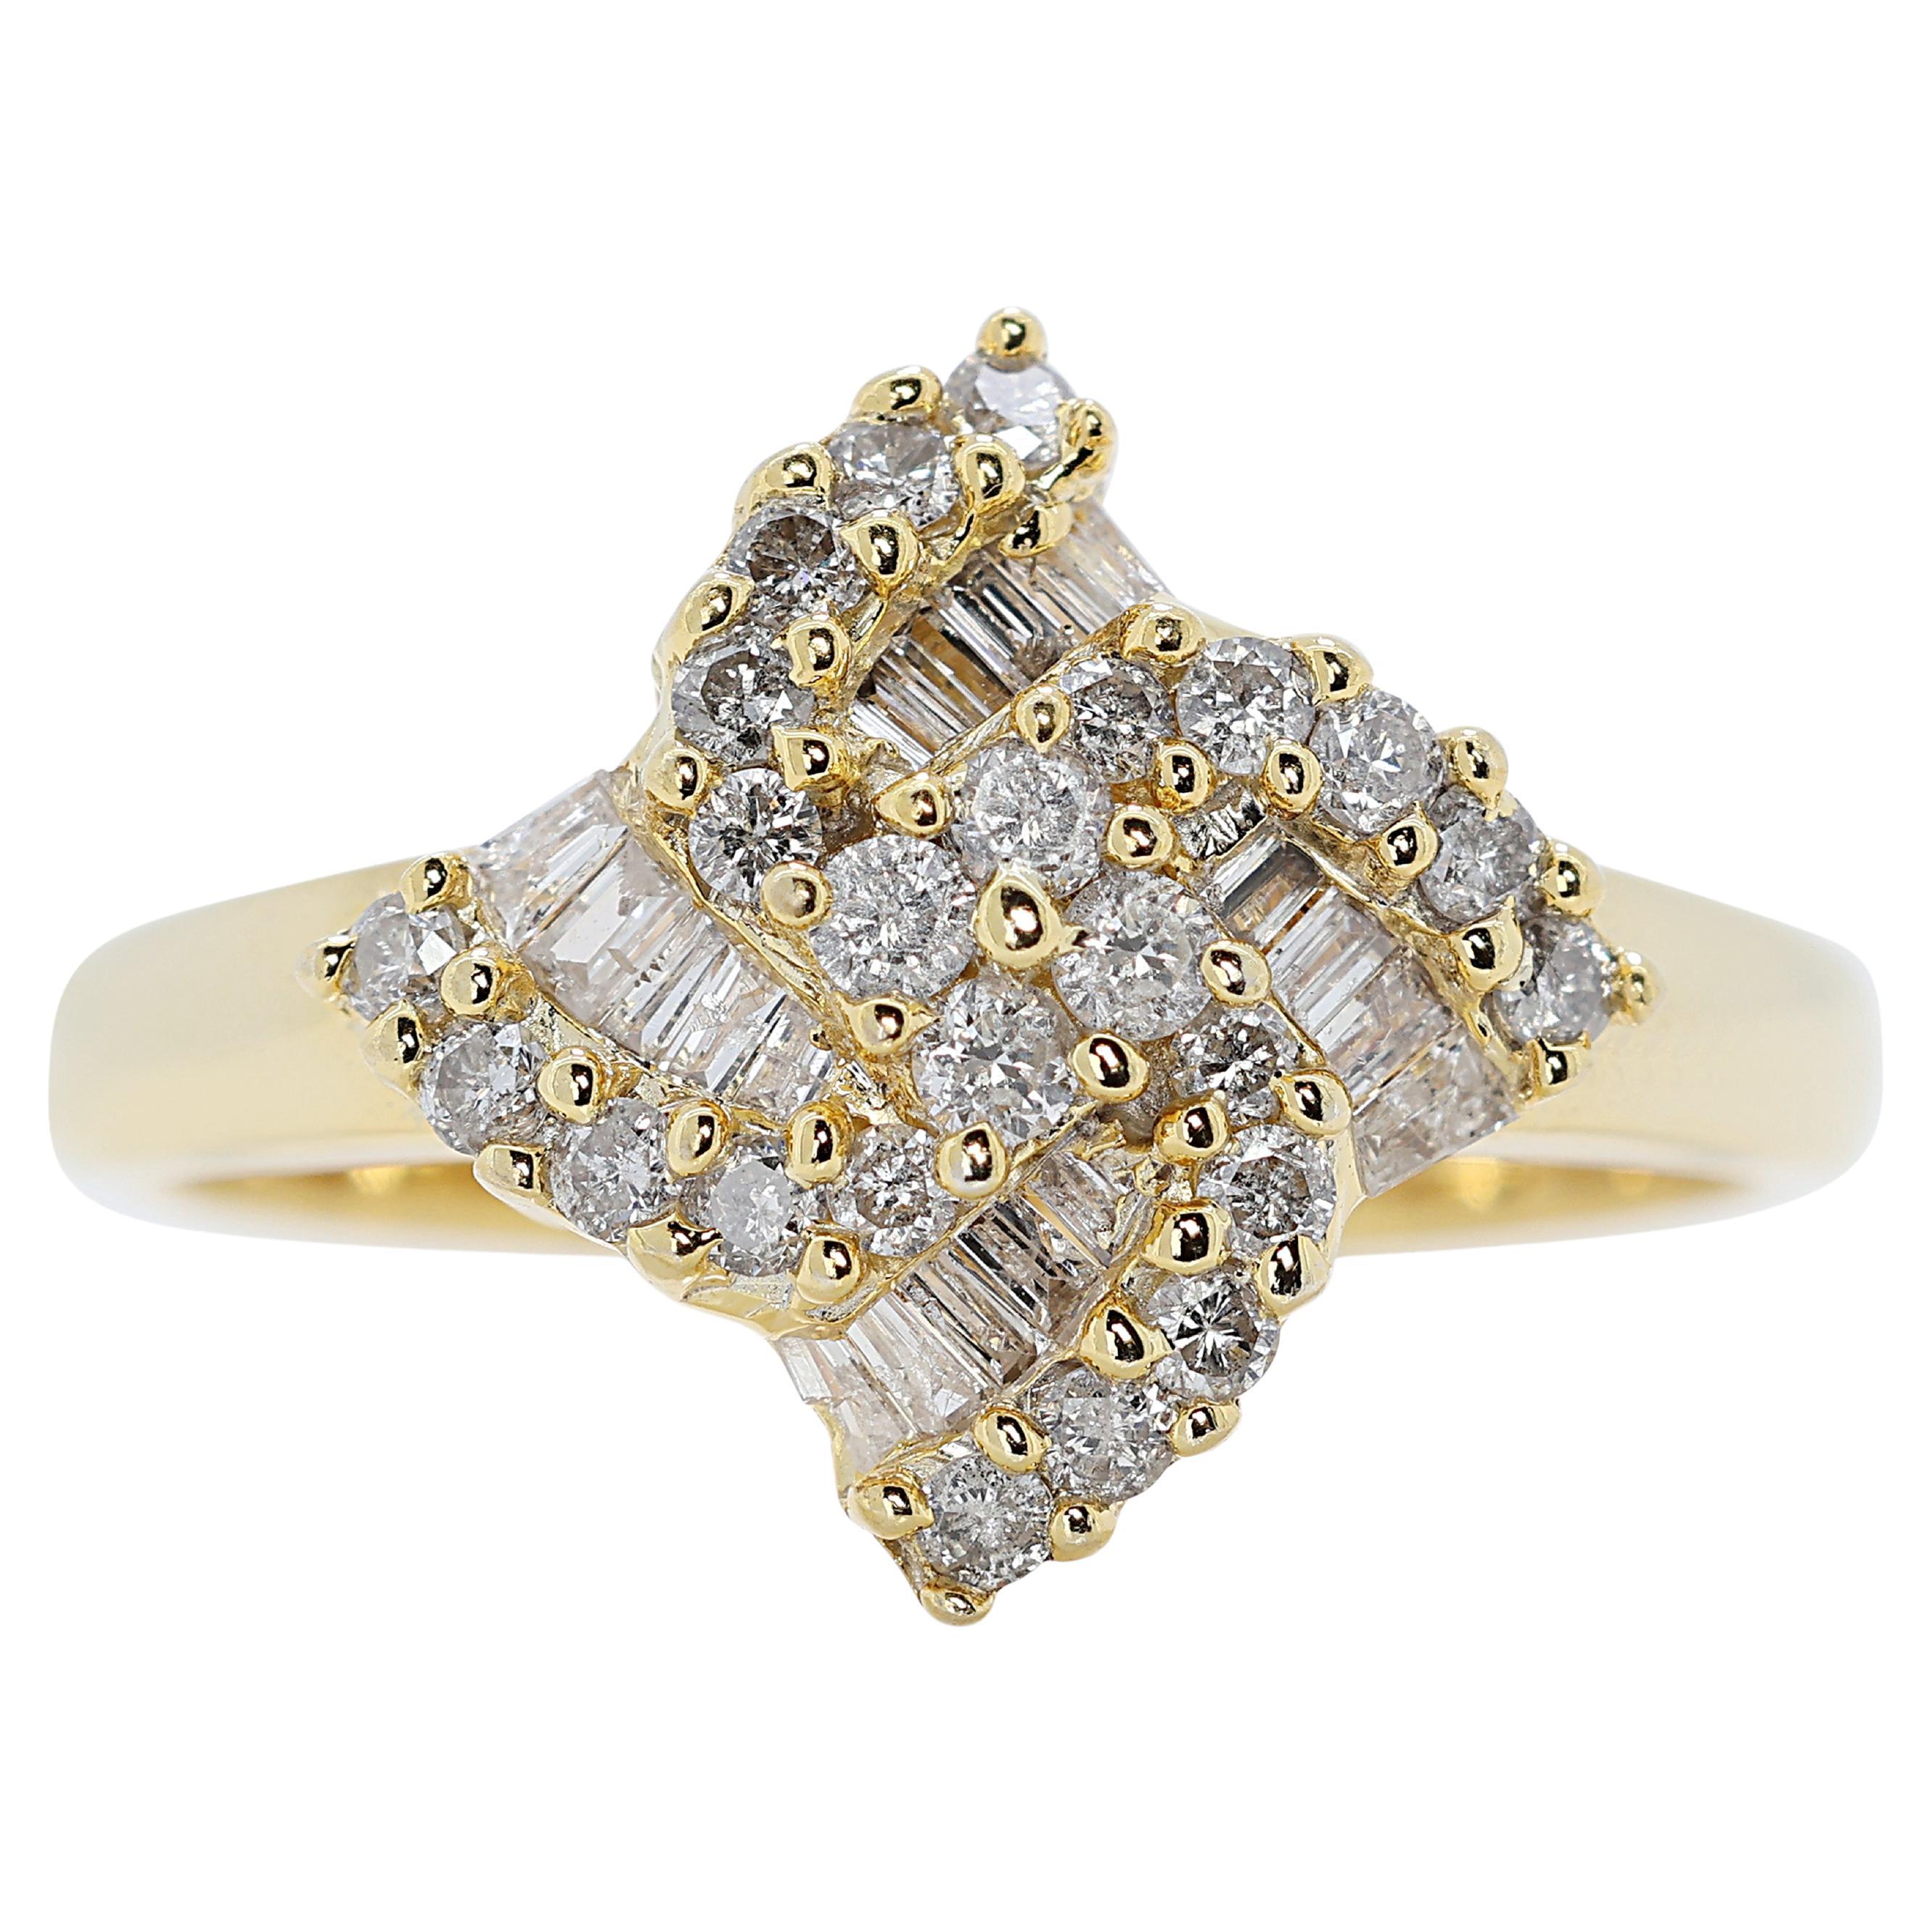 Brilliant 0.42ct Diamonds Cluster Ring in 18K Yellow Gold